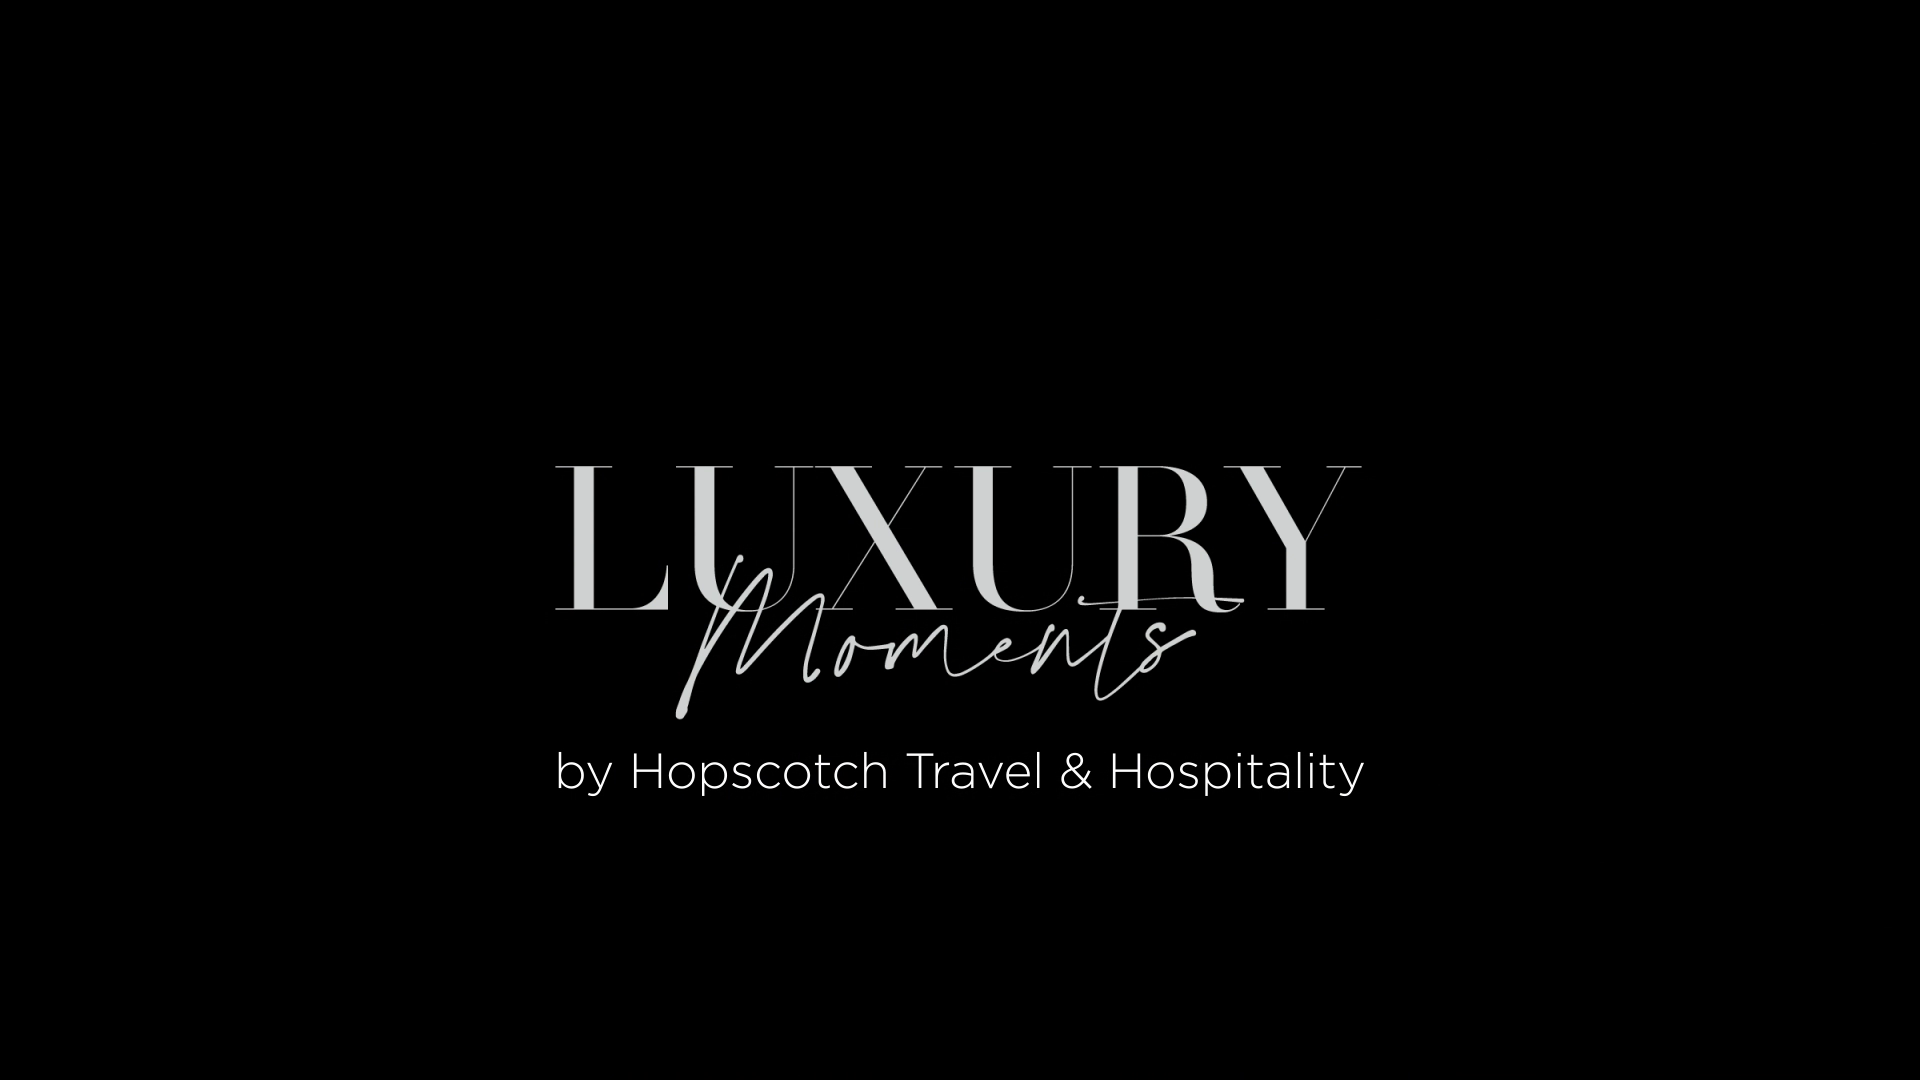 The tailor-made now has a name : Luxury Moments by Hopscotch